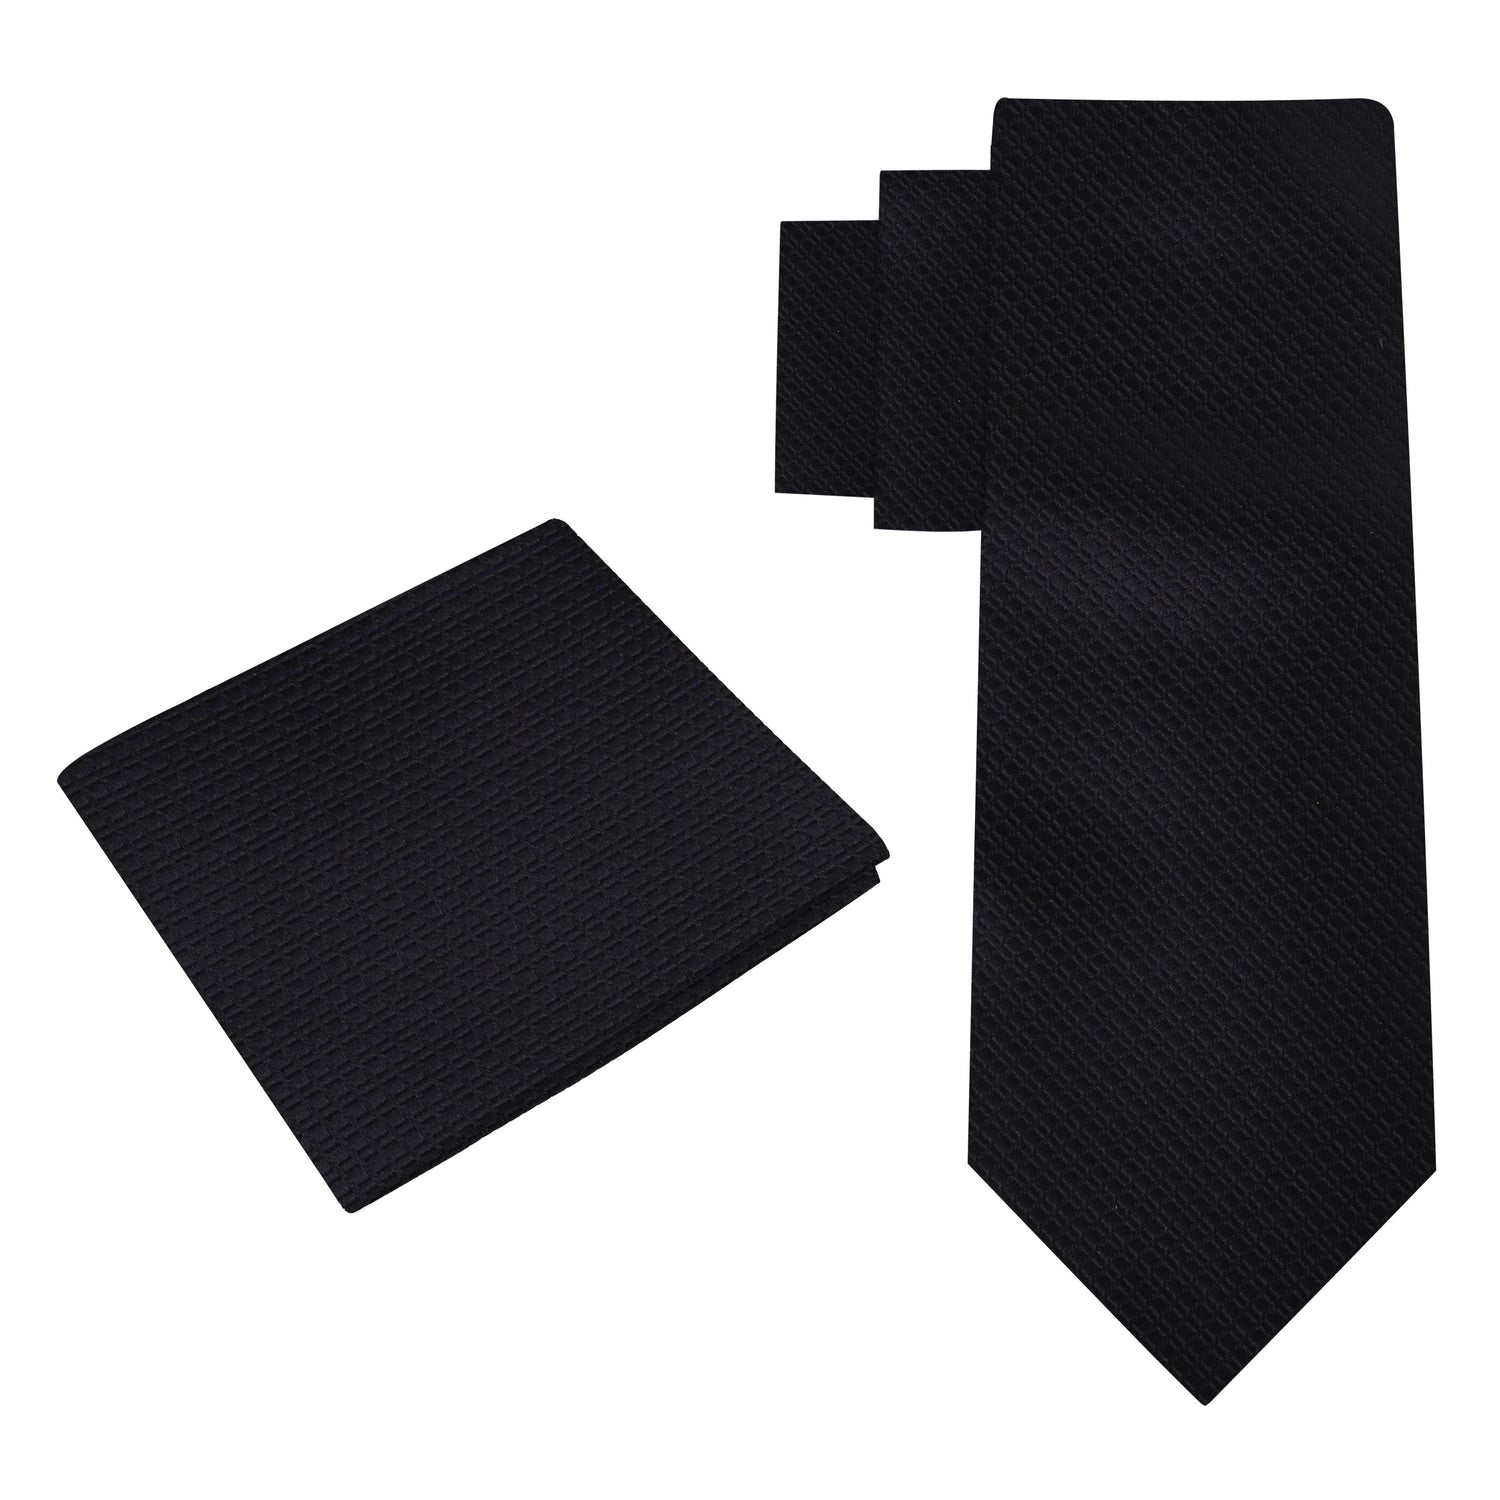 Alt View: A Solid Black Tie With Small Check Texture Pattern Silk Necktie With Matching Pocket Square